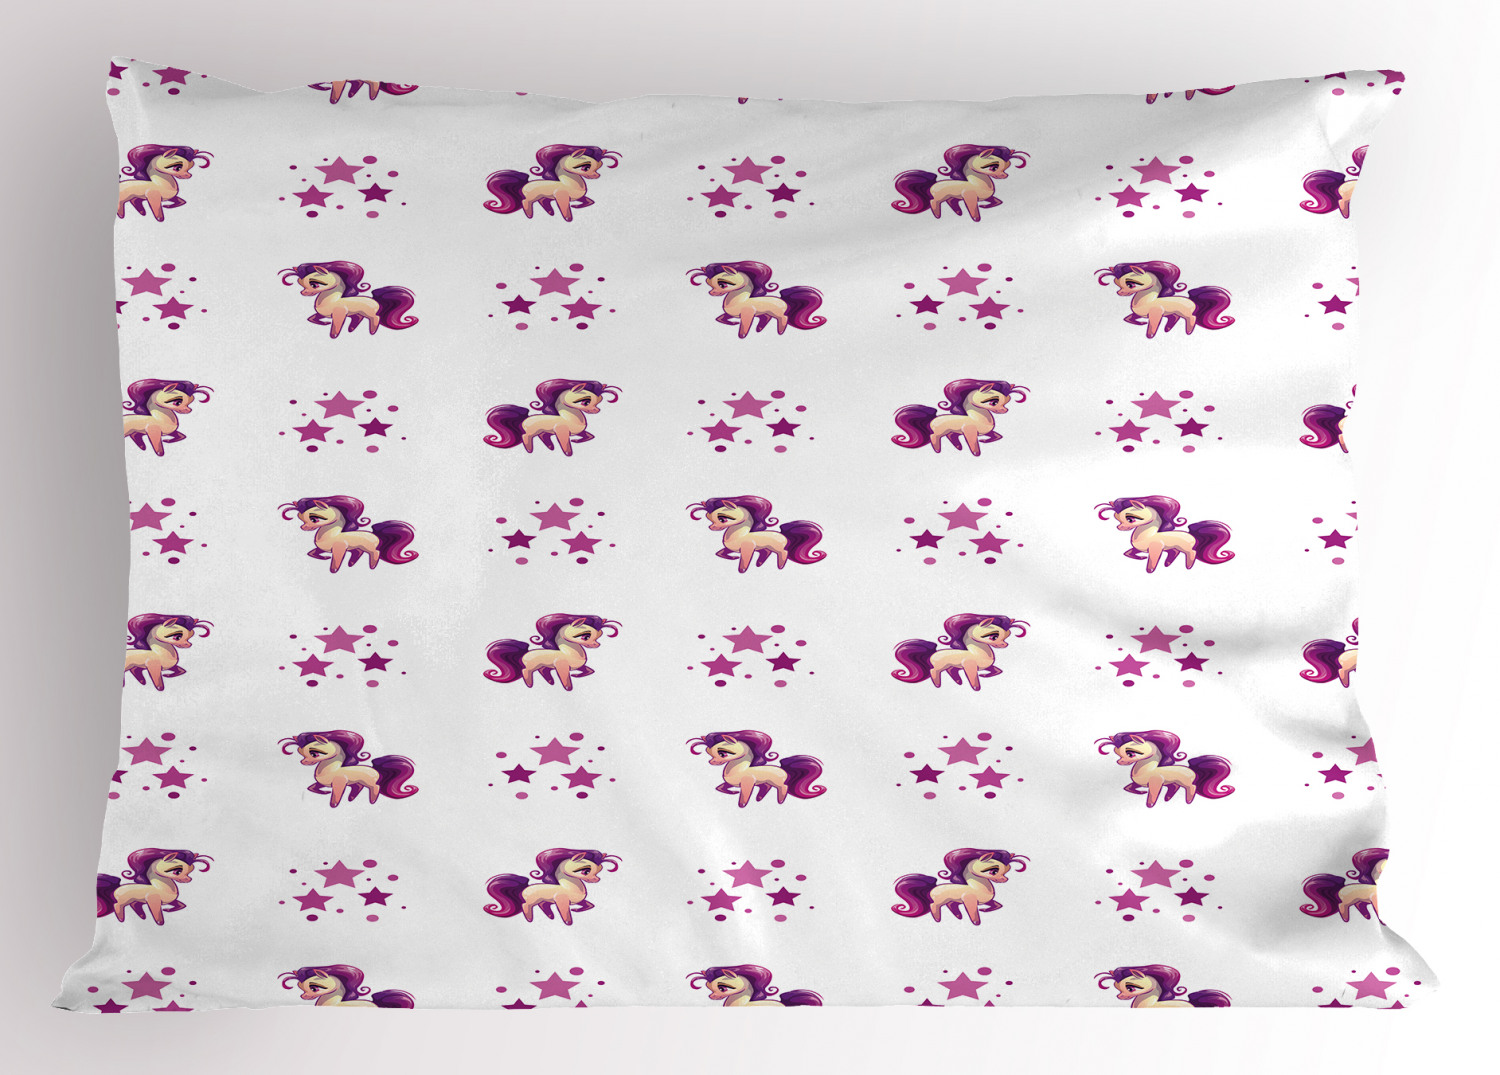 Details about   Girly Pillow Sham Decorative Pillowcase 3 Sizes Bedroom Decoration